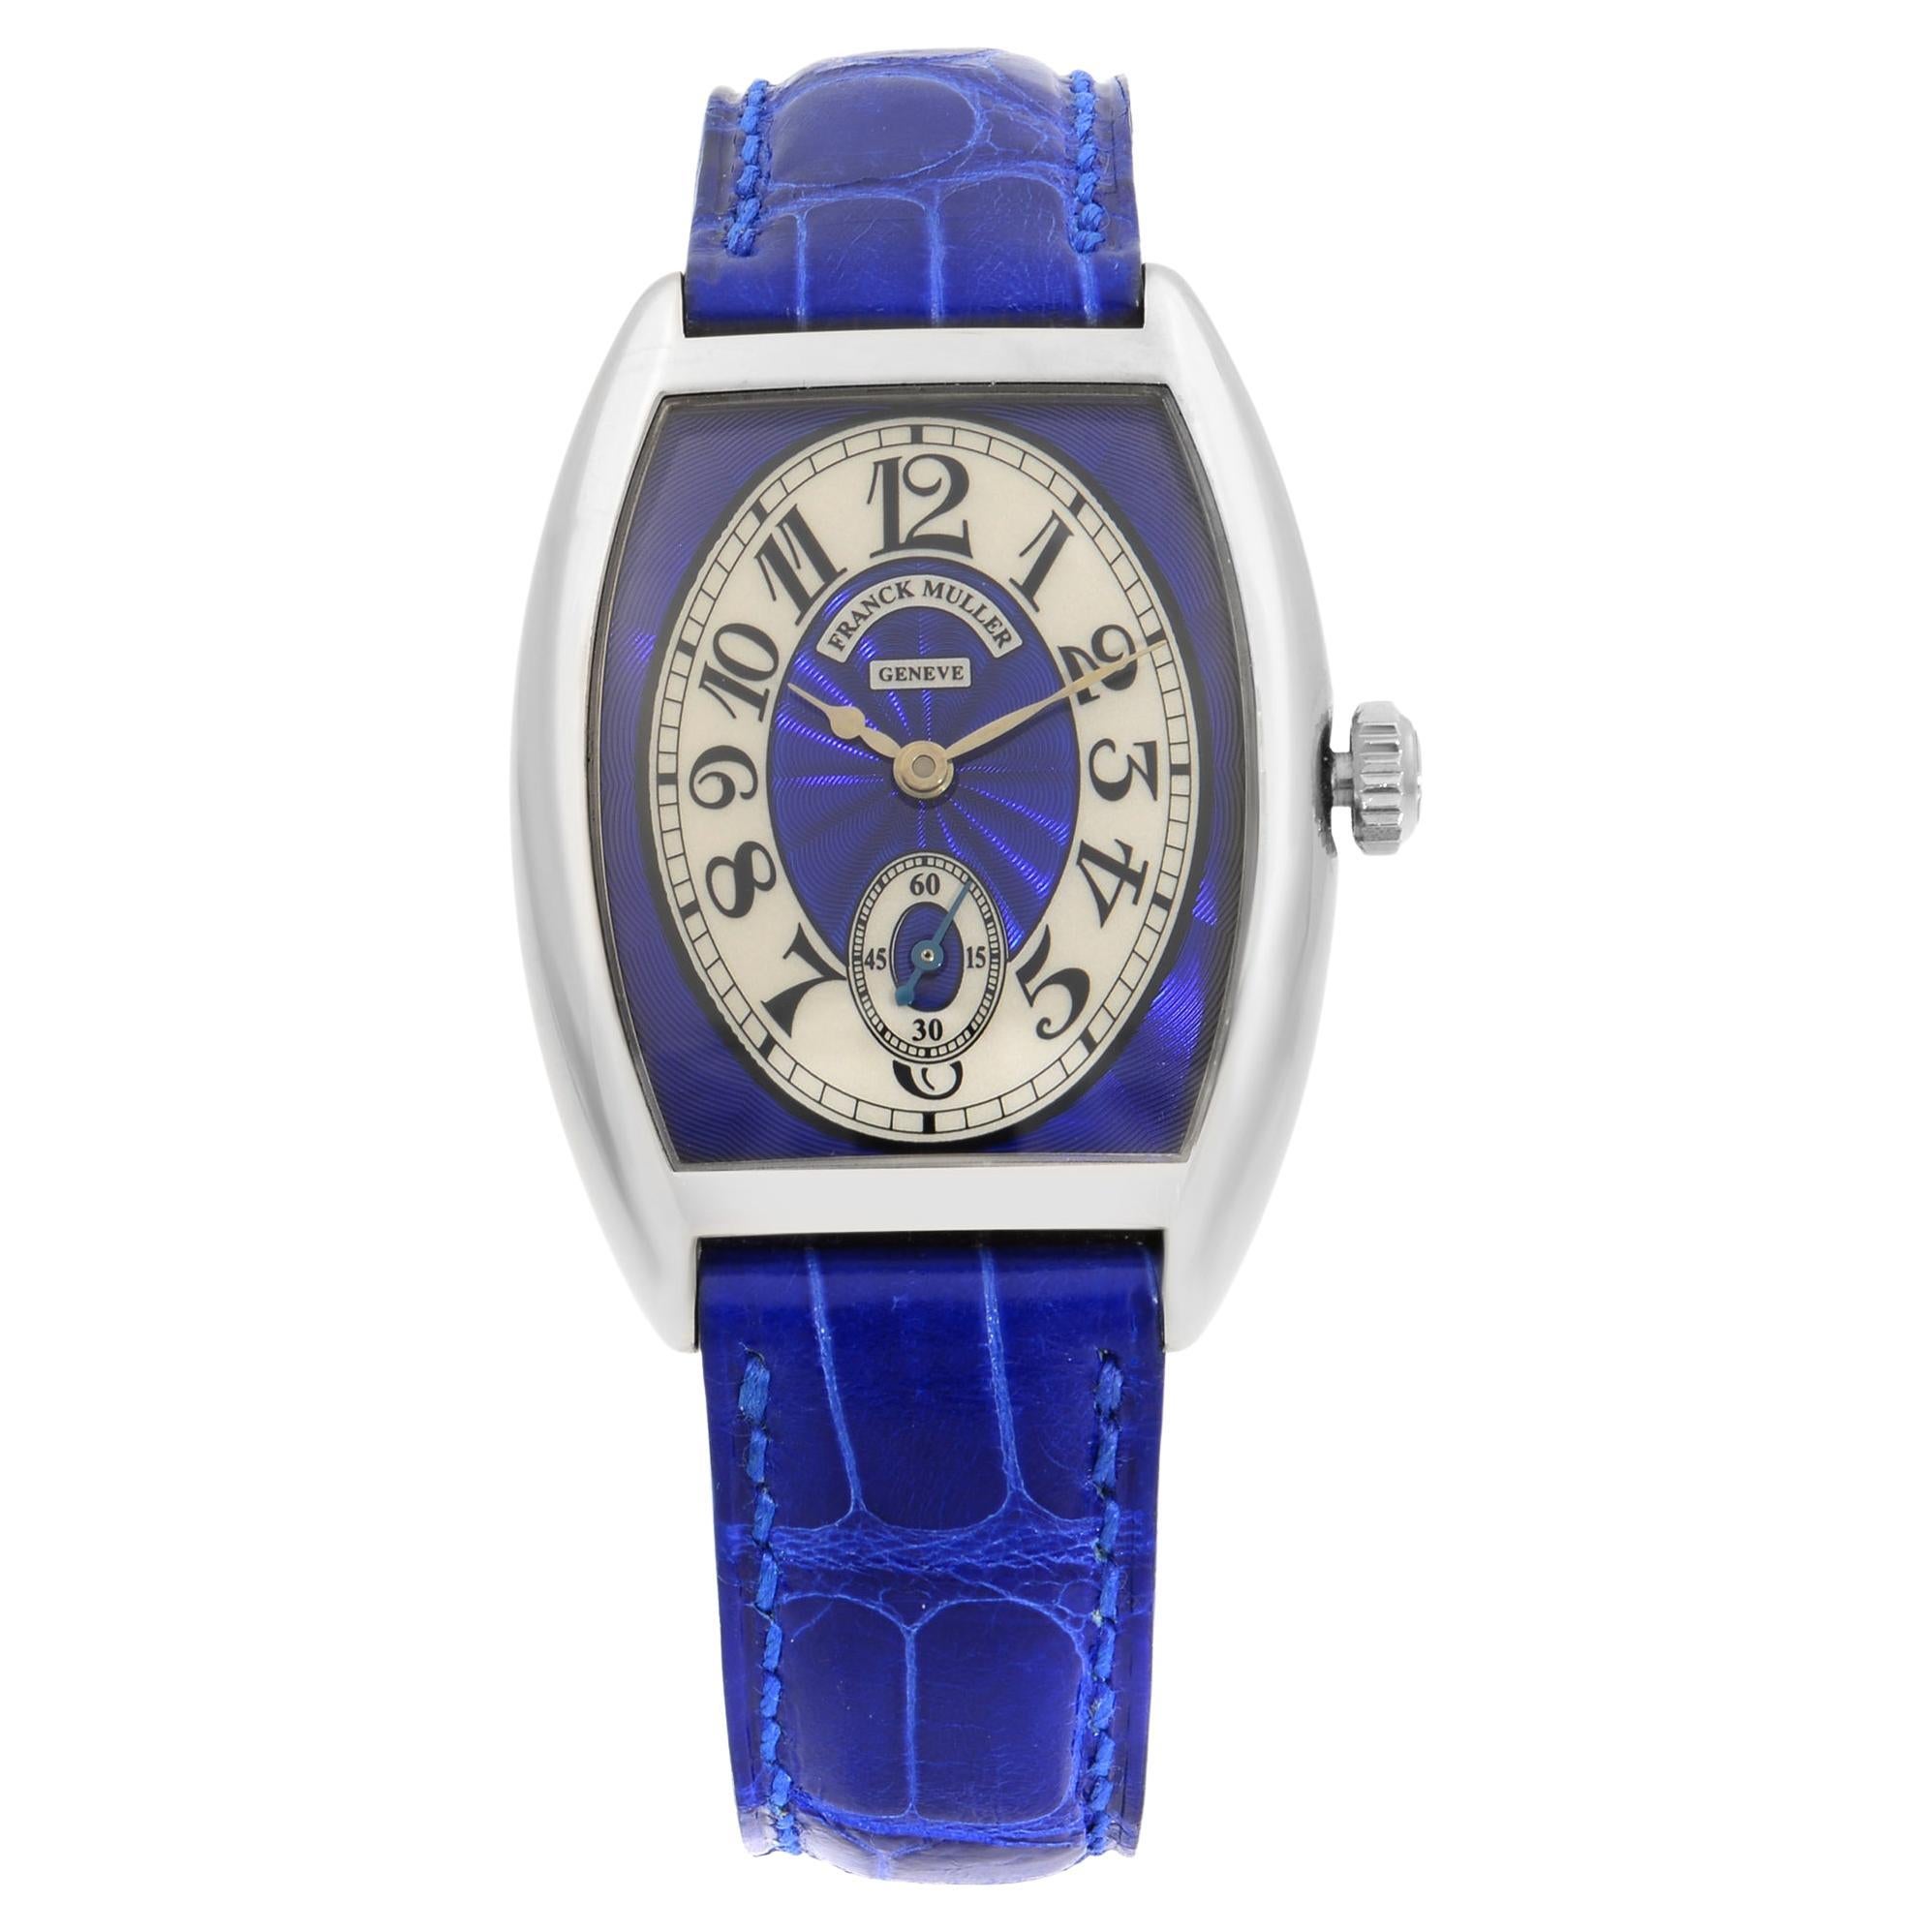 Franck Muller Cintree 18K Gold Blue Silver Dial Hand-Wind Ladies Watch 7502 S6 For Sale